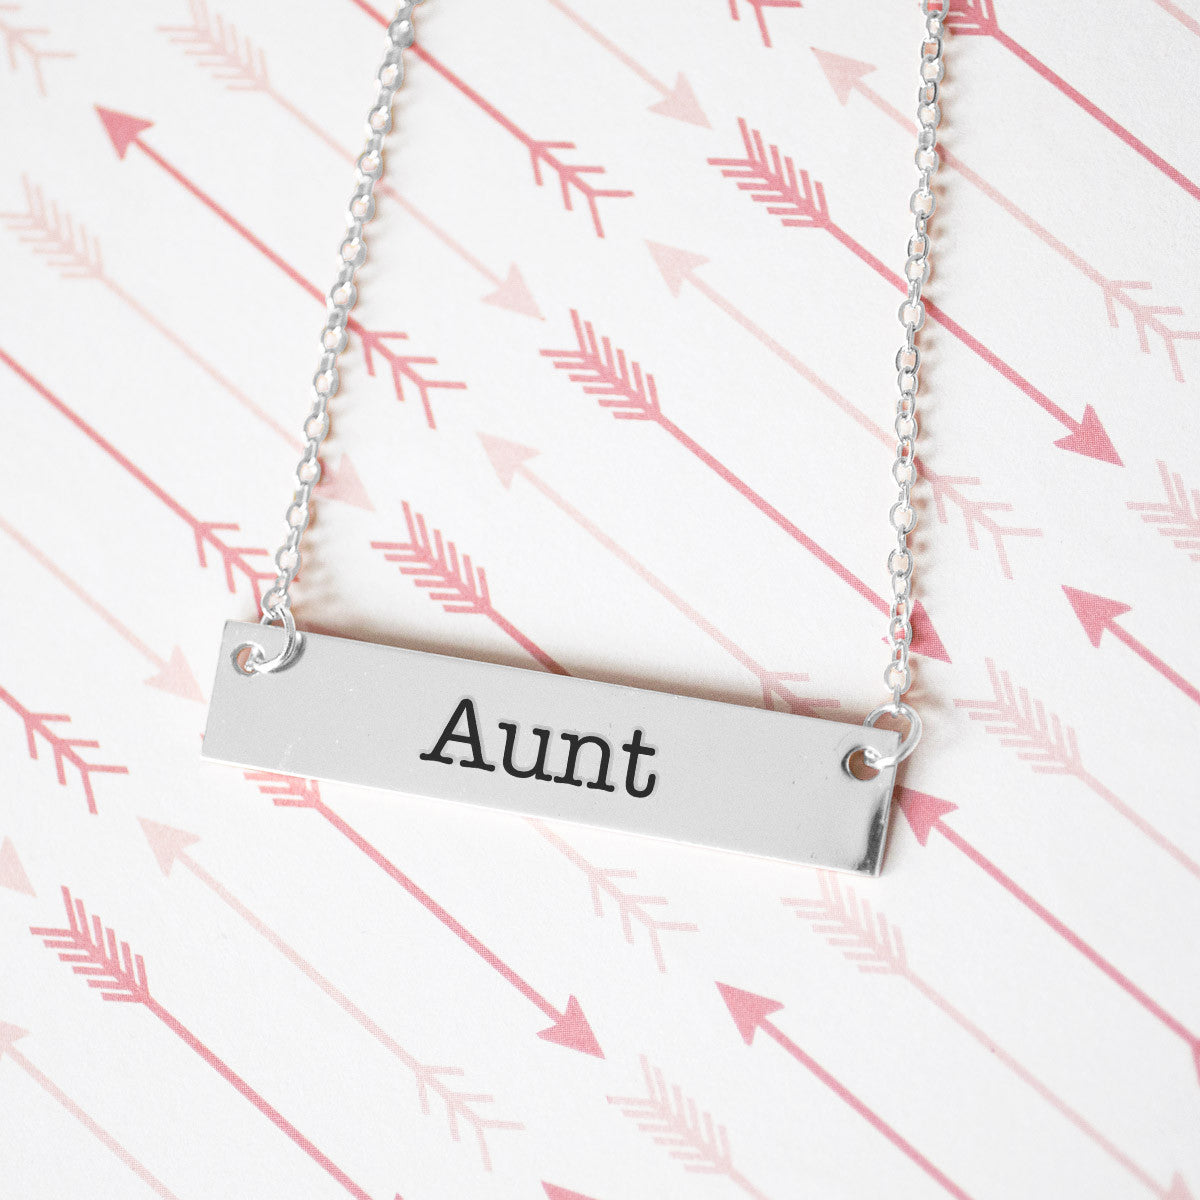 Aunt Gold / Silver Bar Necklace - pipercleo.com